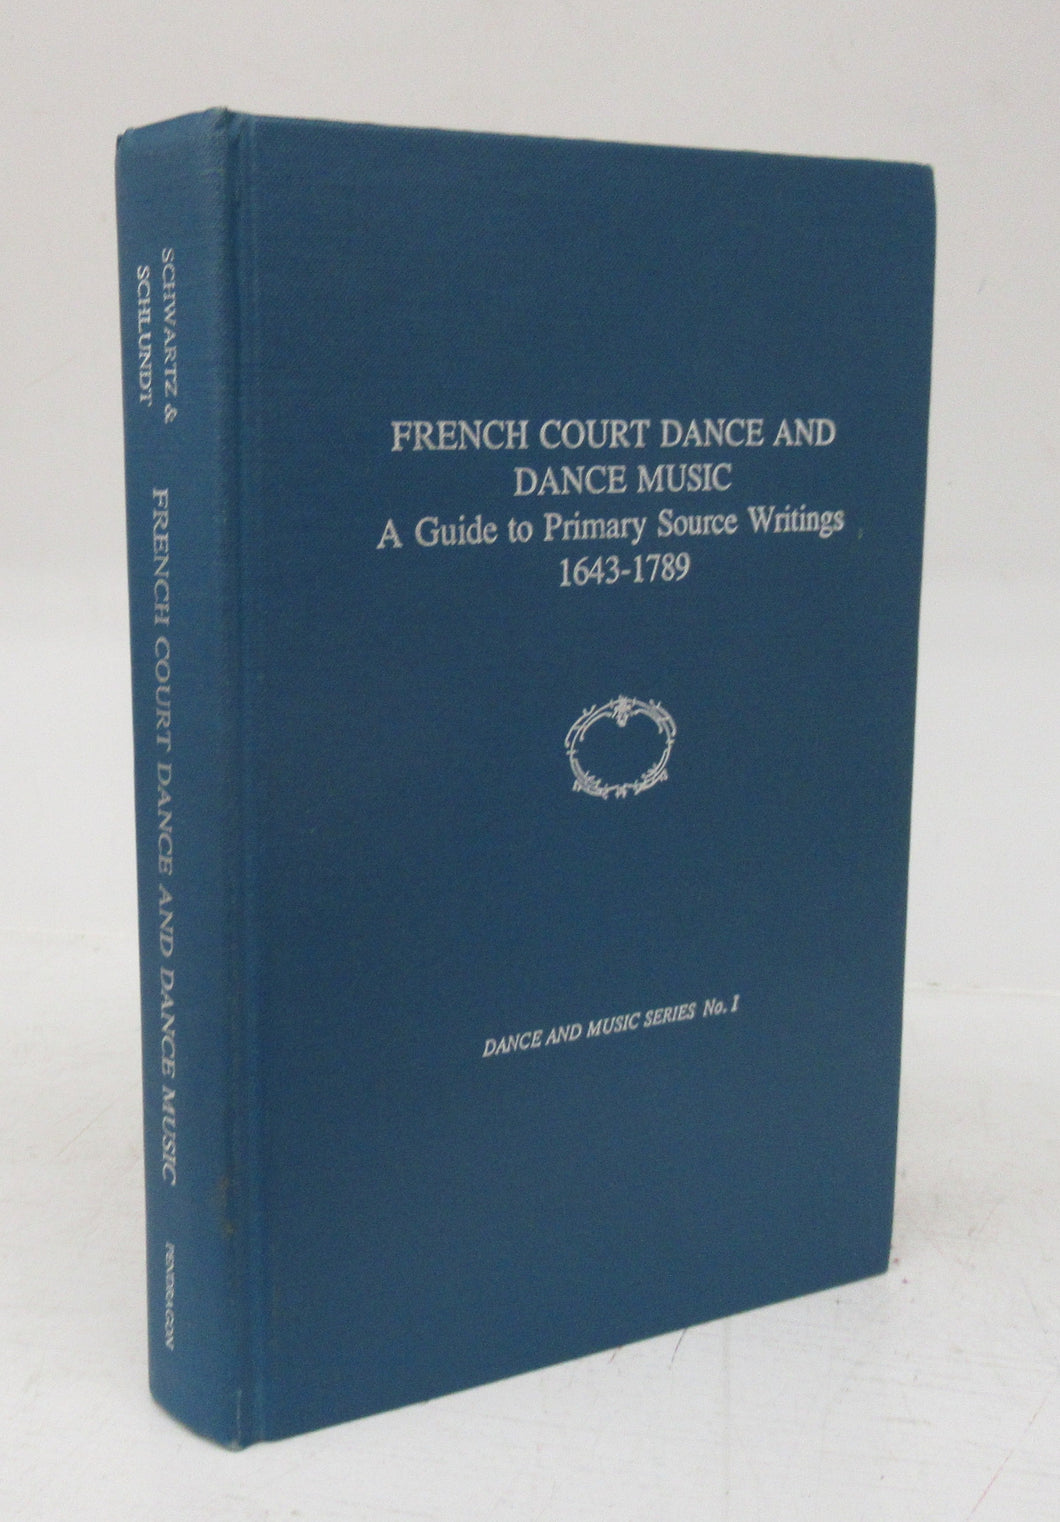 French Court Dance and Dance Music: A Guide to Primary Source Writings 1643-1789